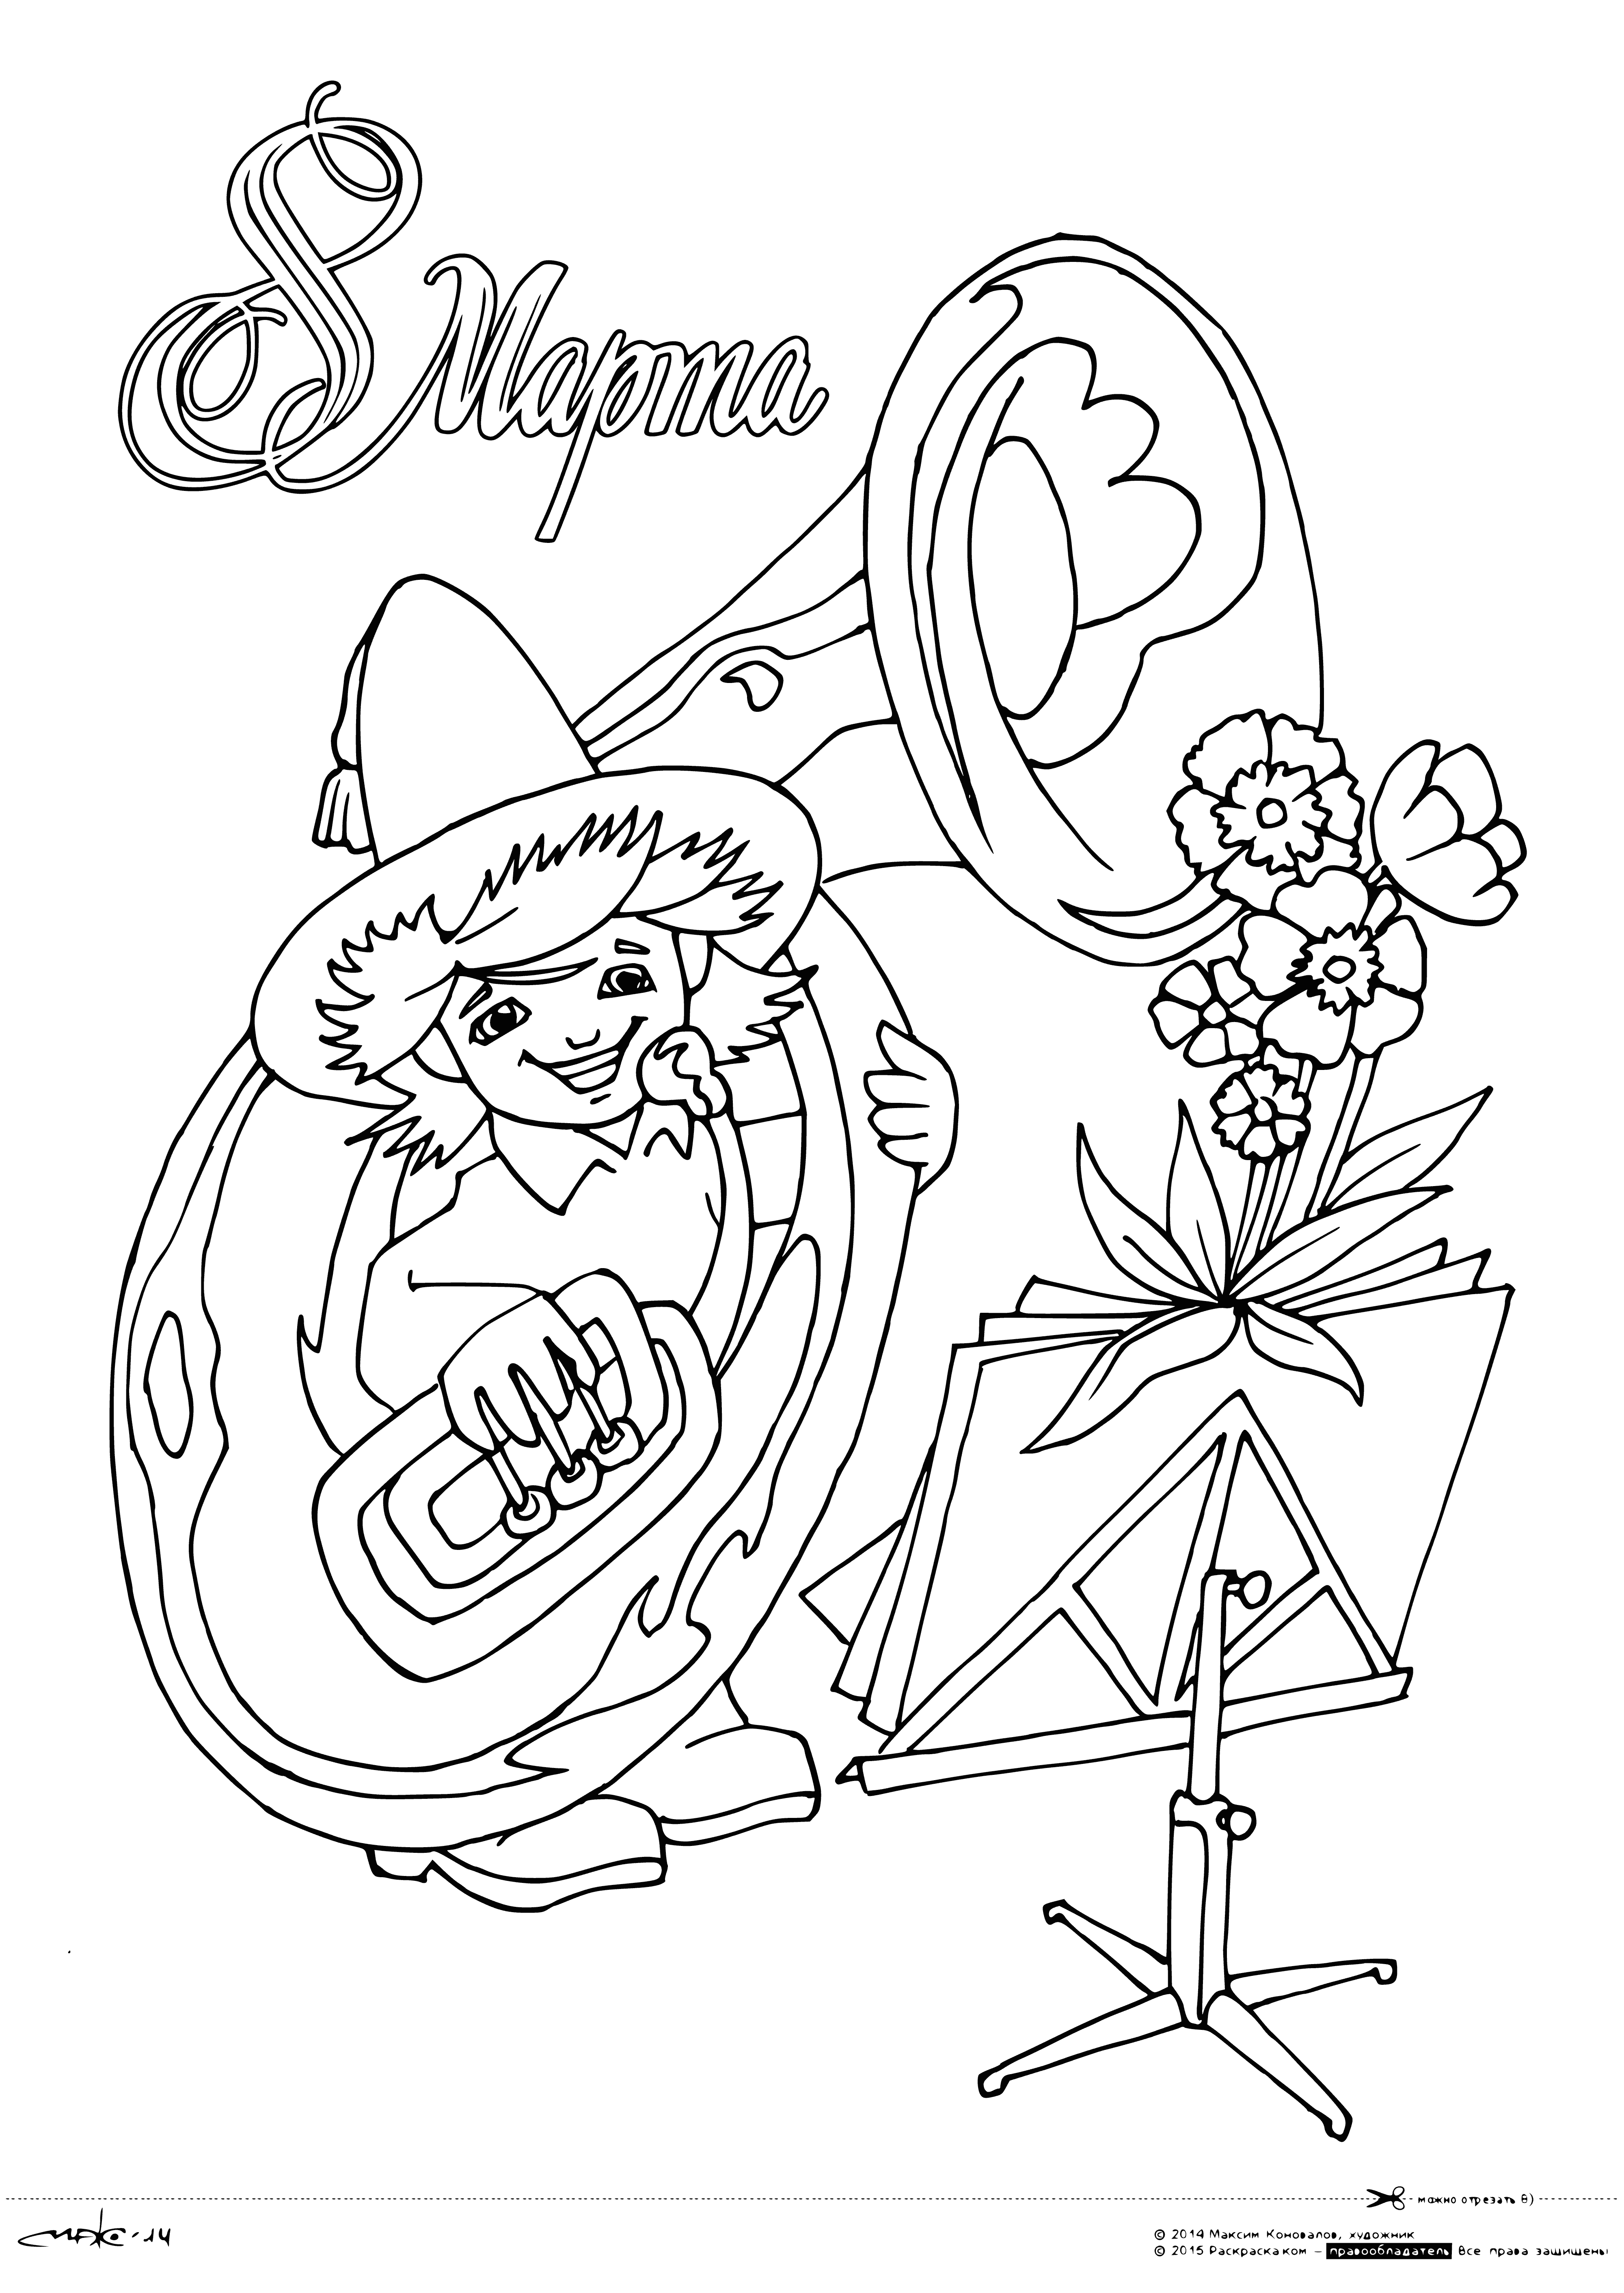 coloring page: International Women's Day celebrates women of all ages & races, with a joyful design & message of "I am a woman" on a bright, yellow background.